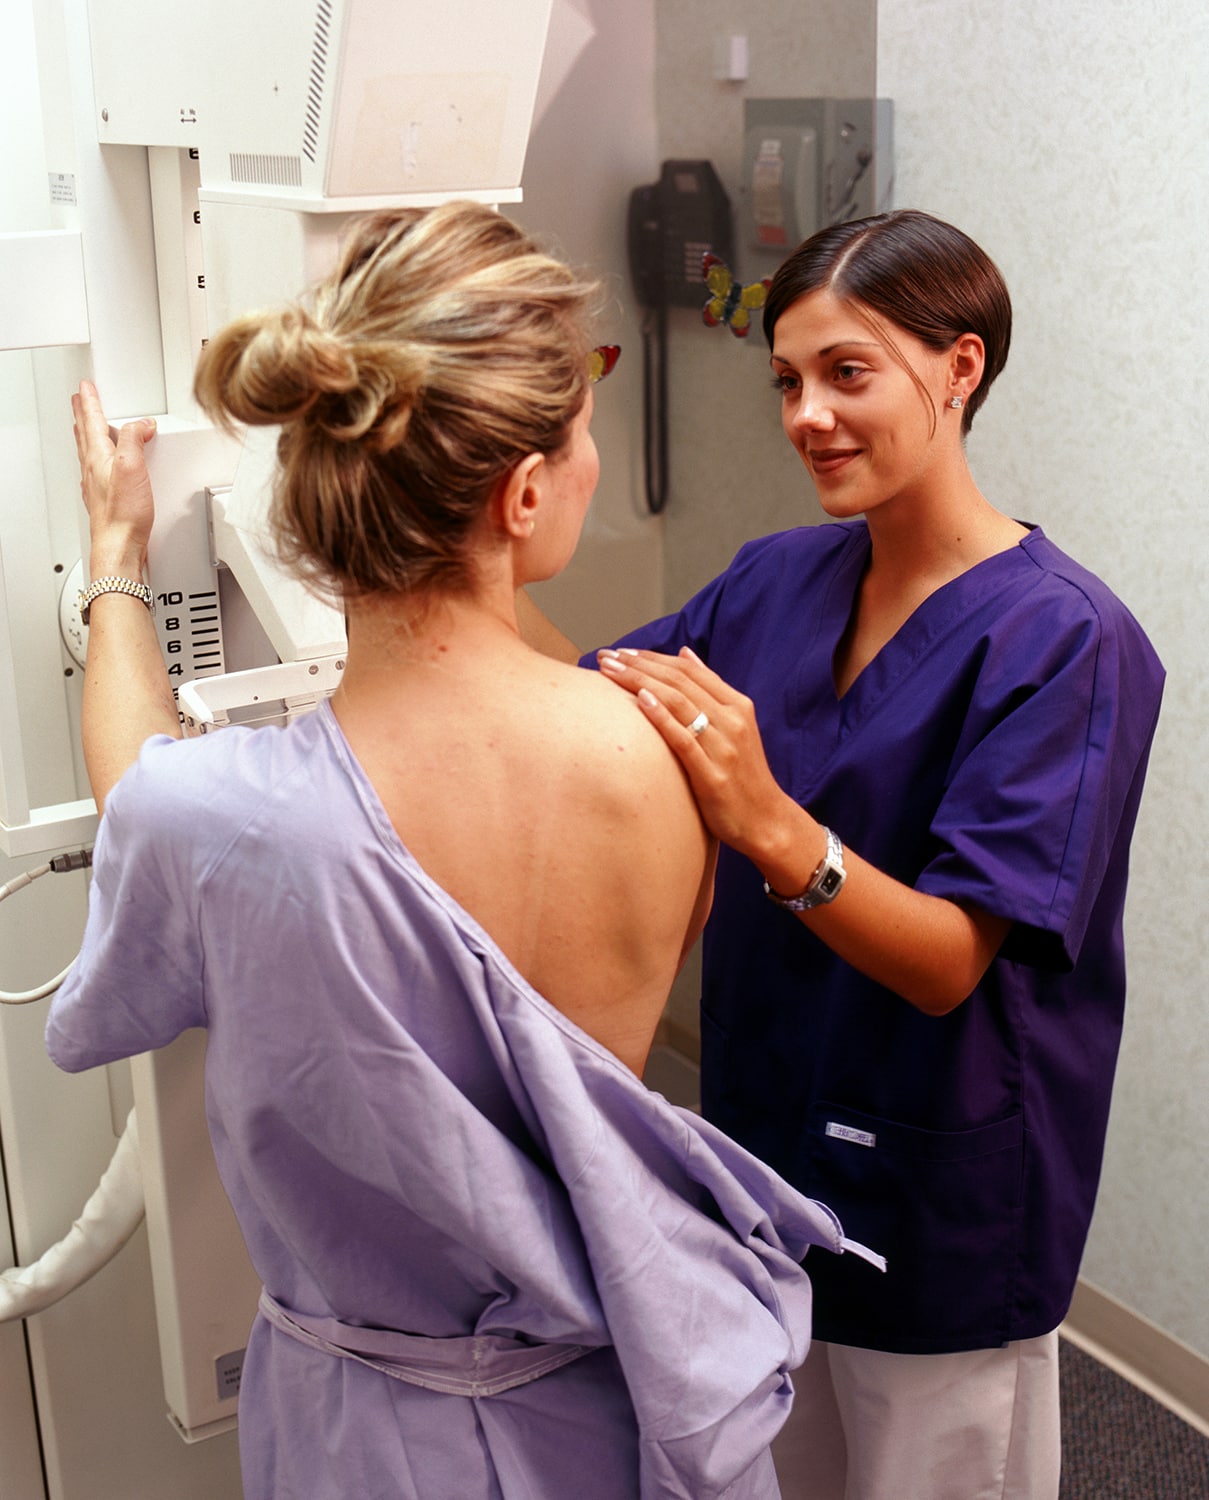 Early Signs of Breast Cancer to Watch for